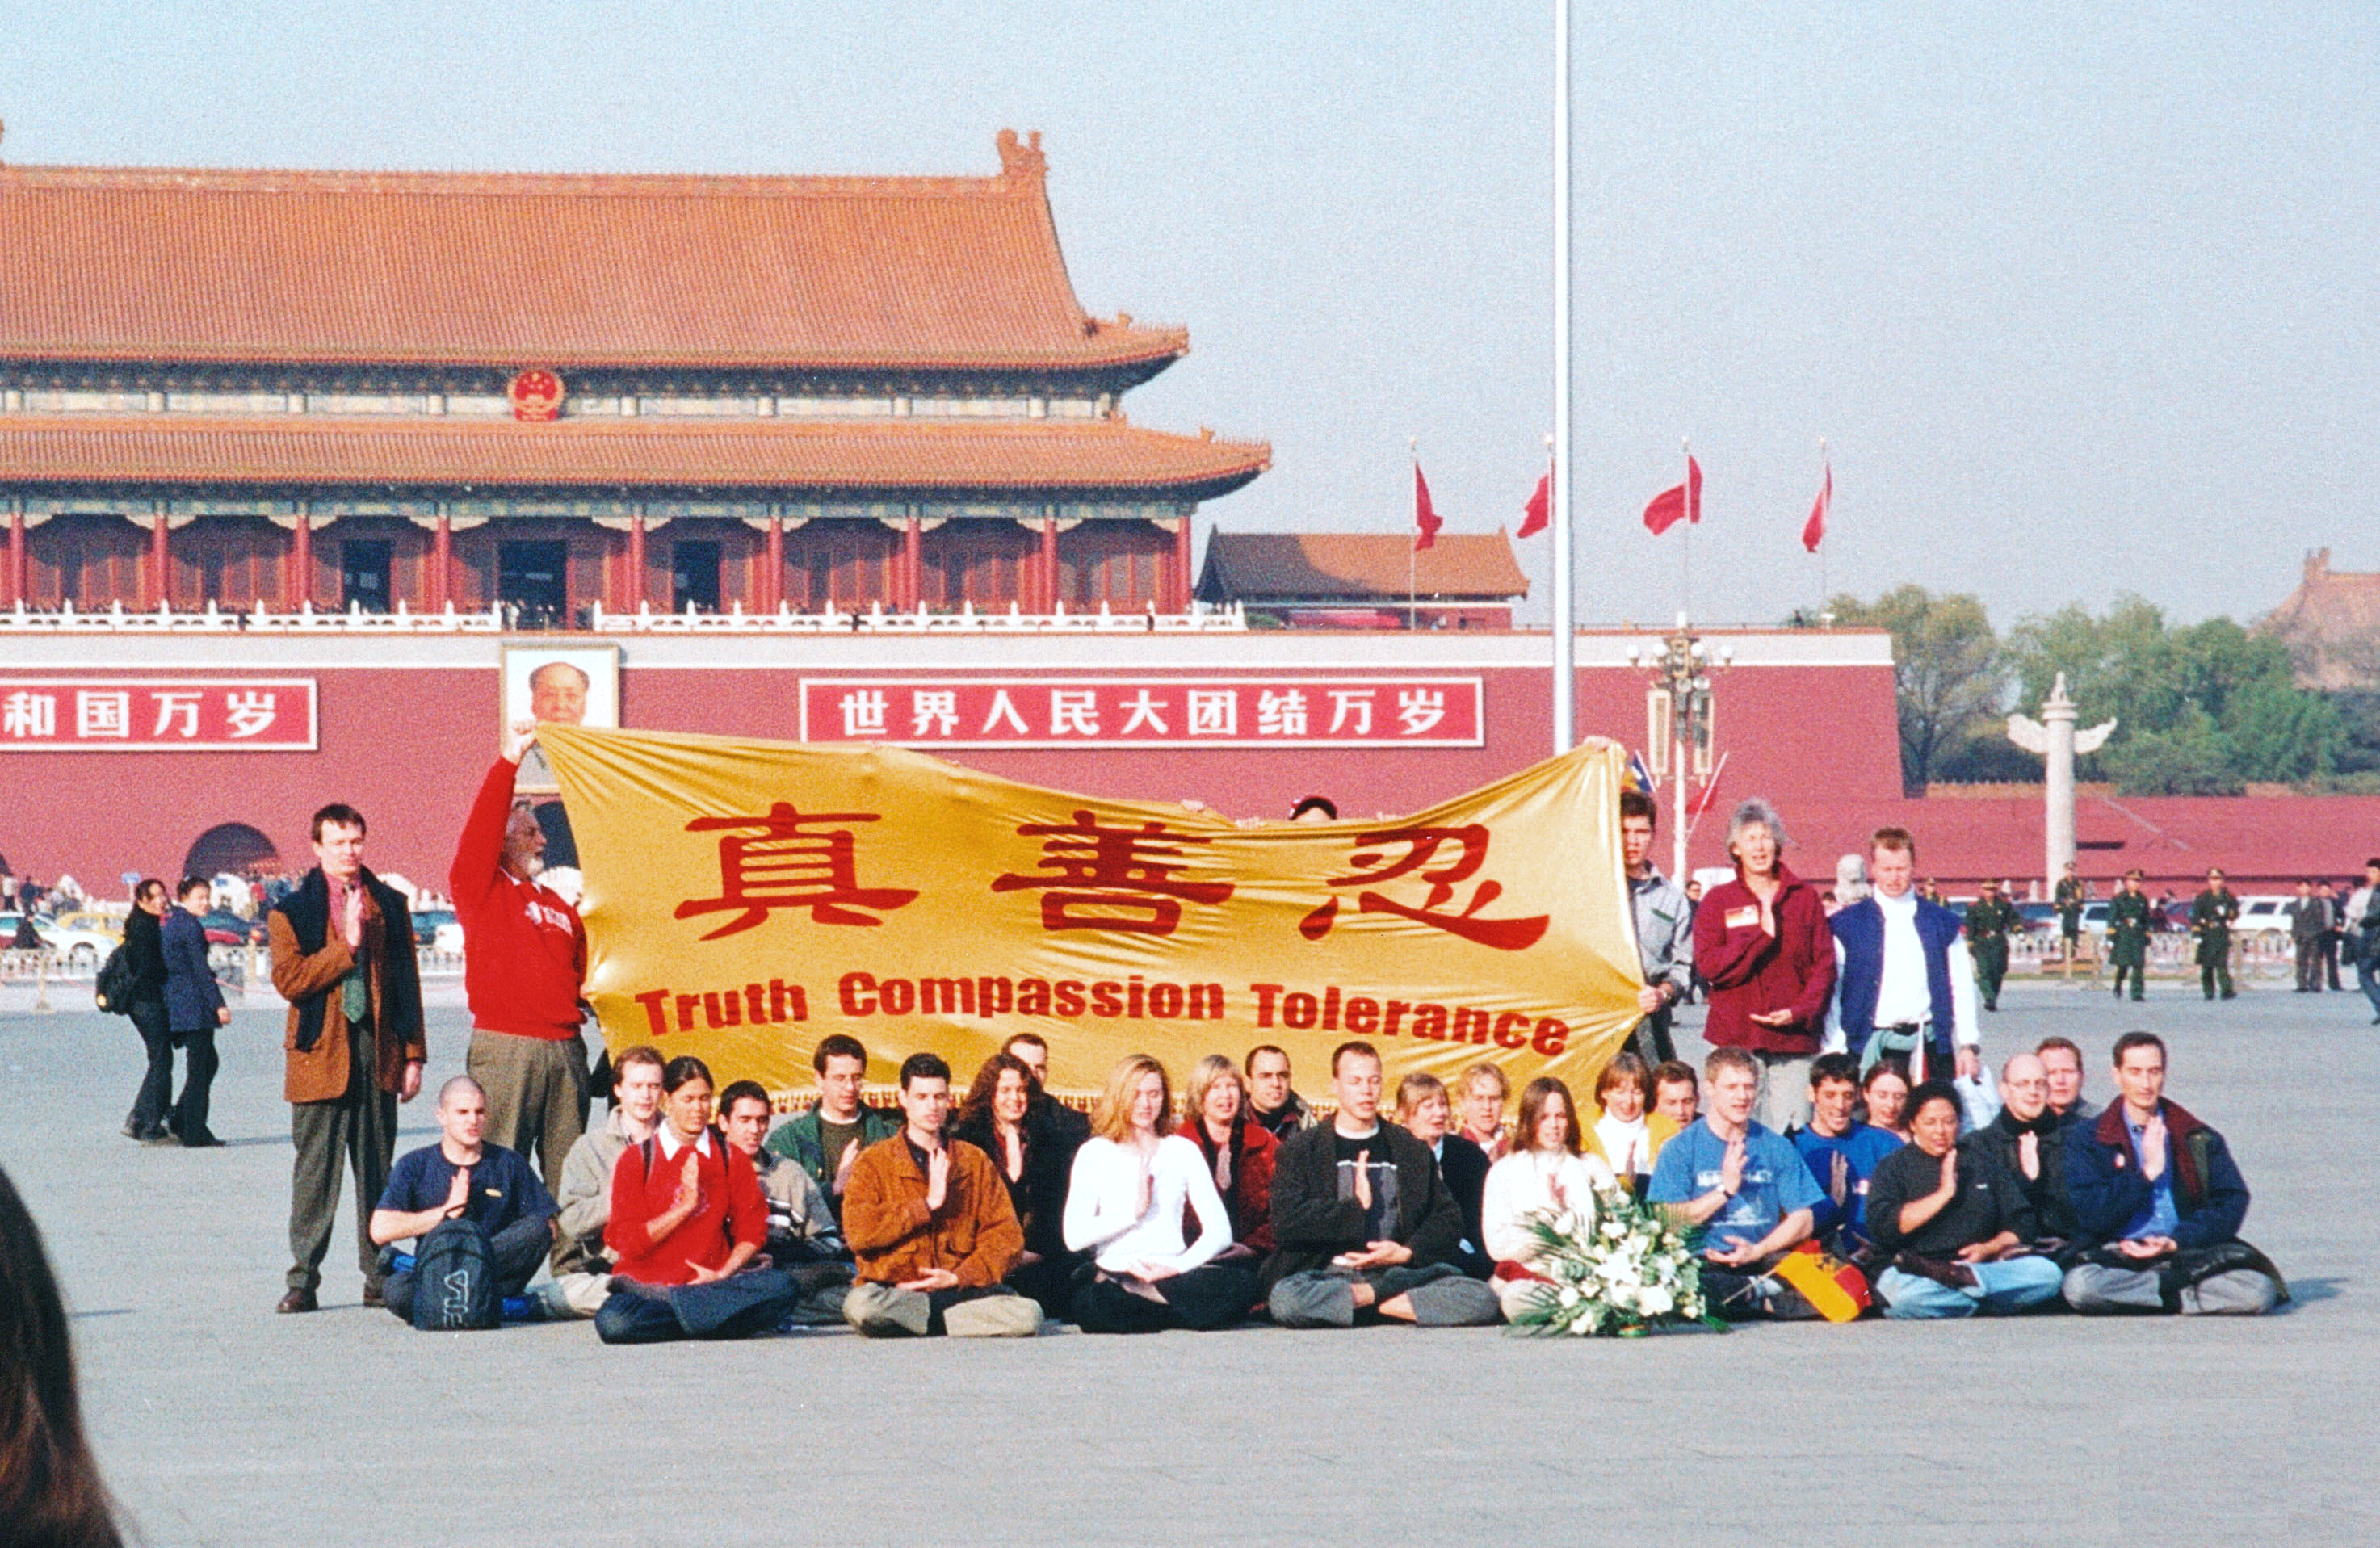 Falun Gong protest